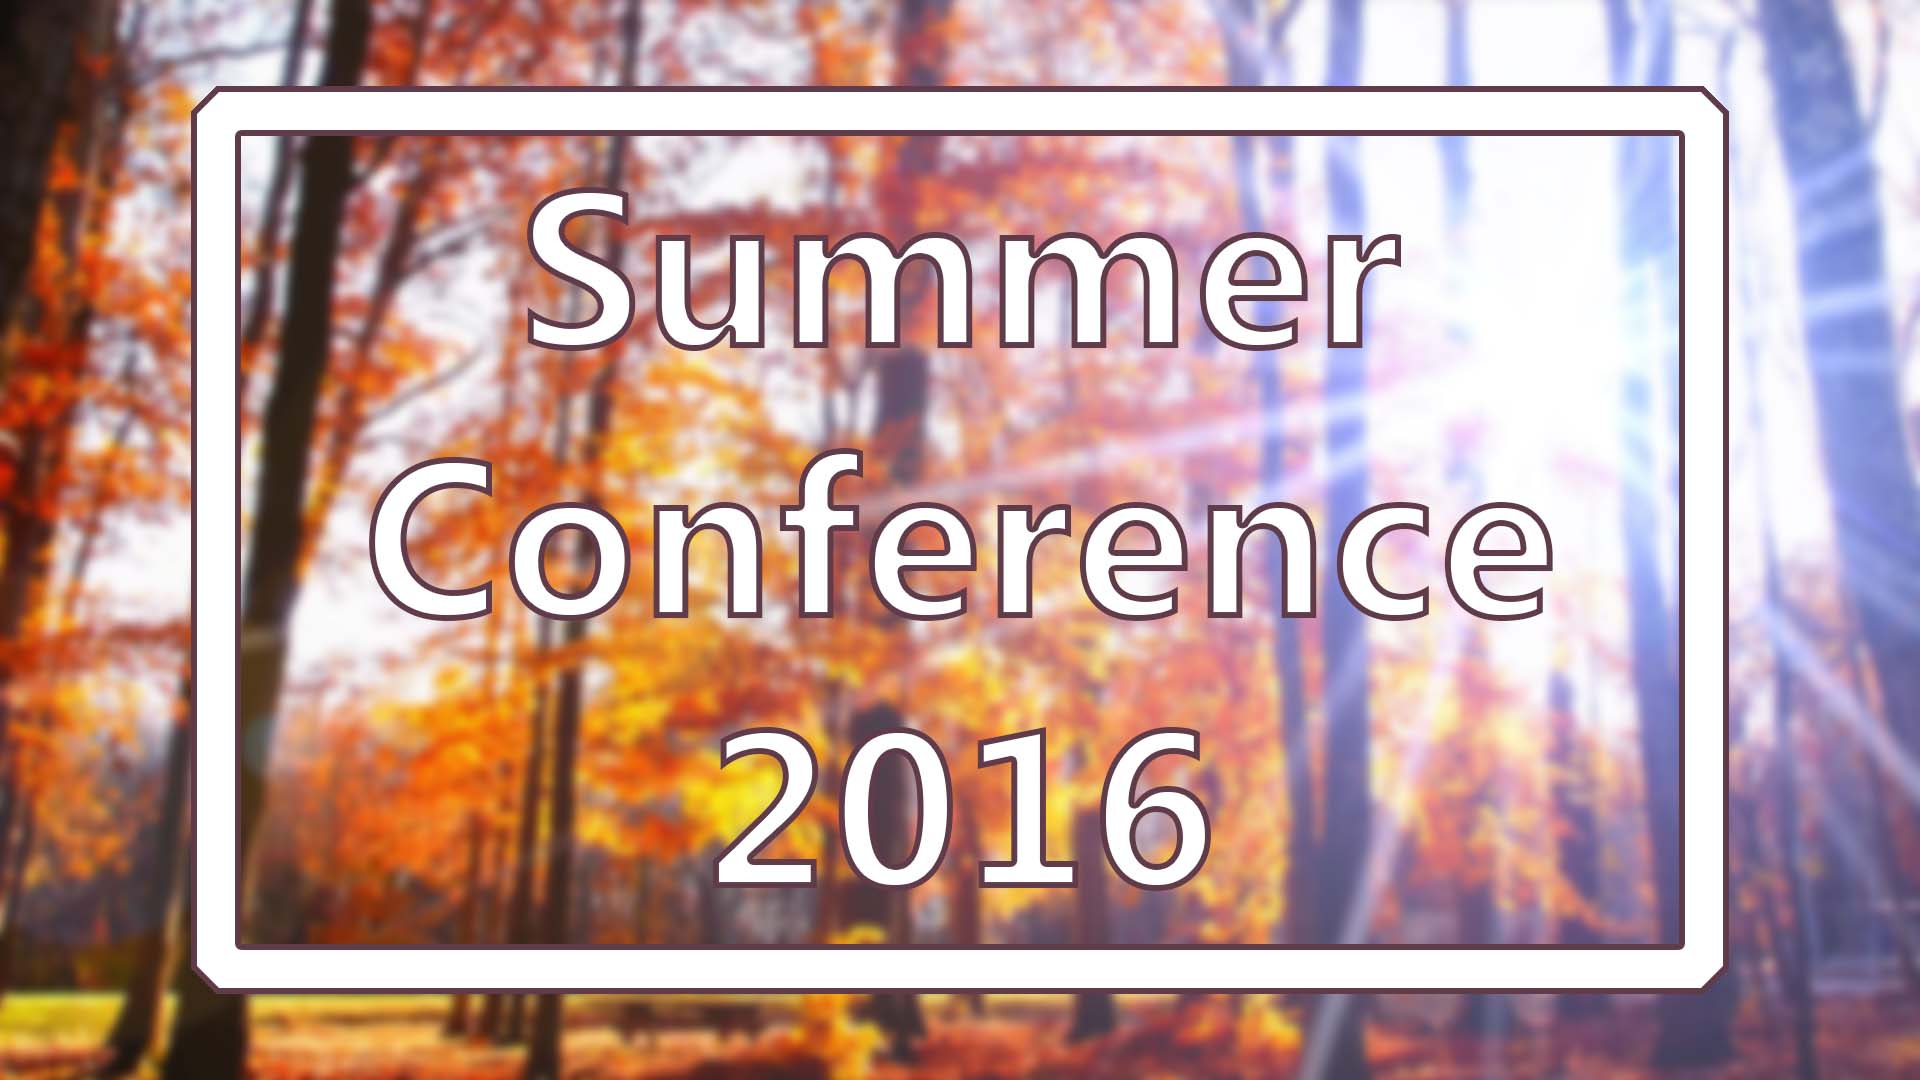 Summer Conference 2016